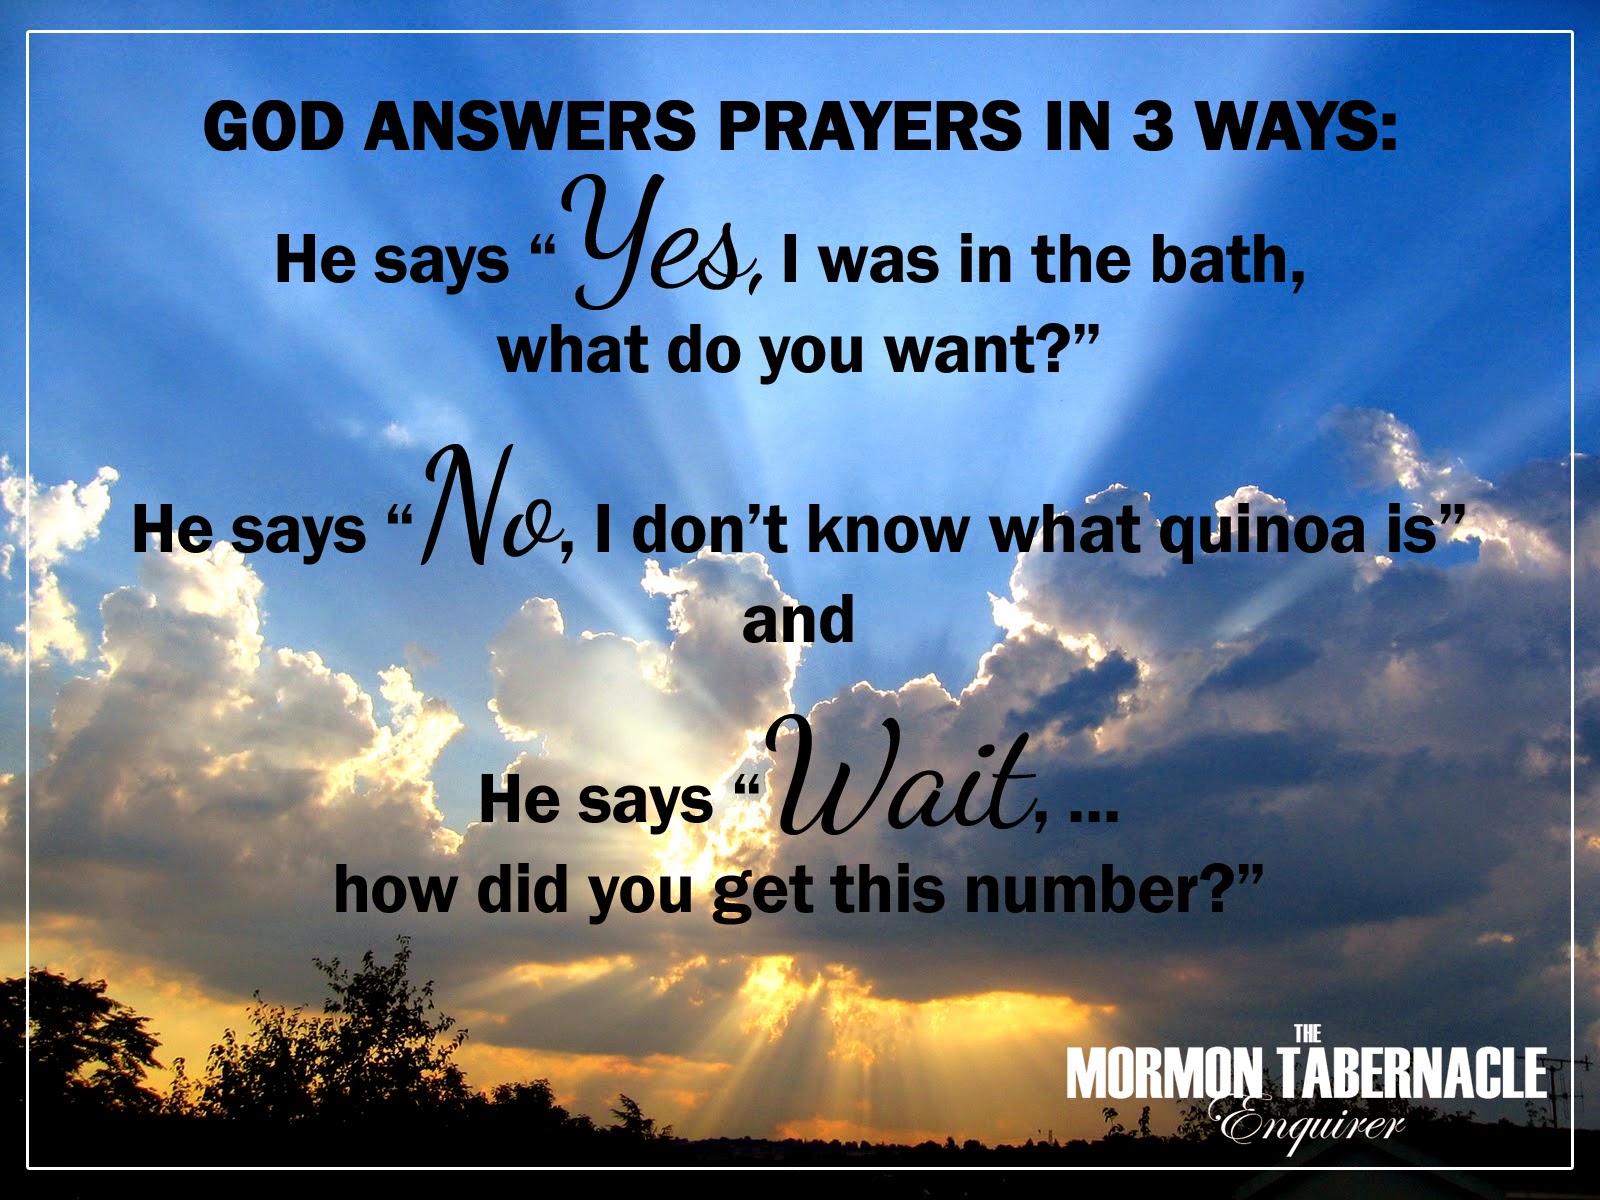 The Mormon Tabernacle Enquirer: WEAKLY AFFIRMATION: GOD ANSWERS ...